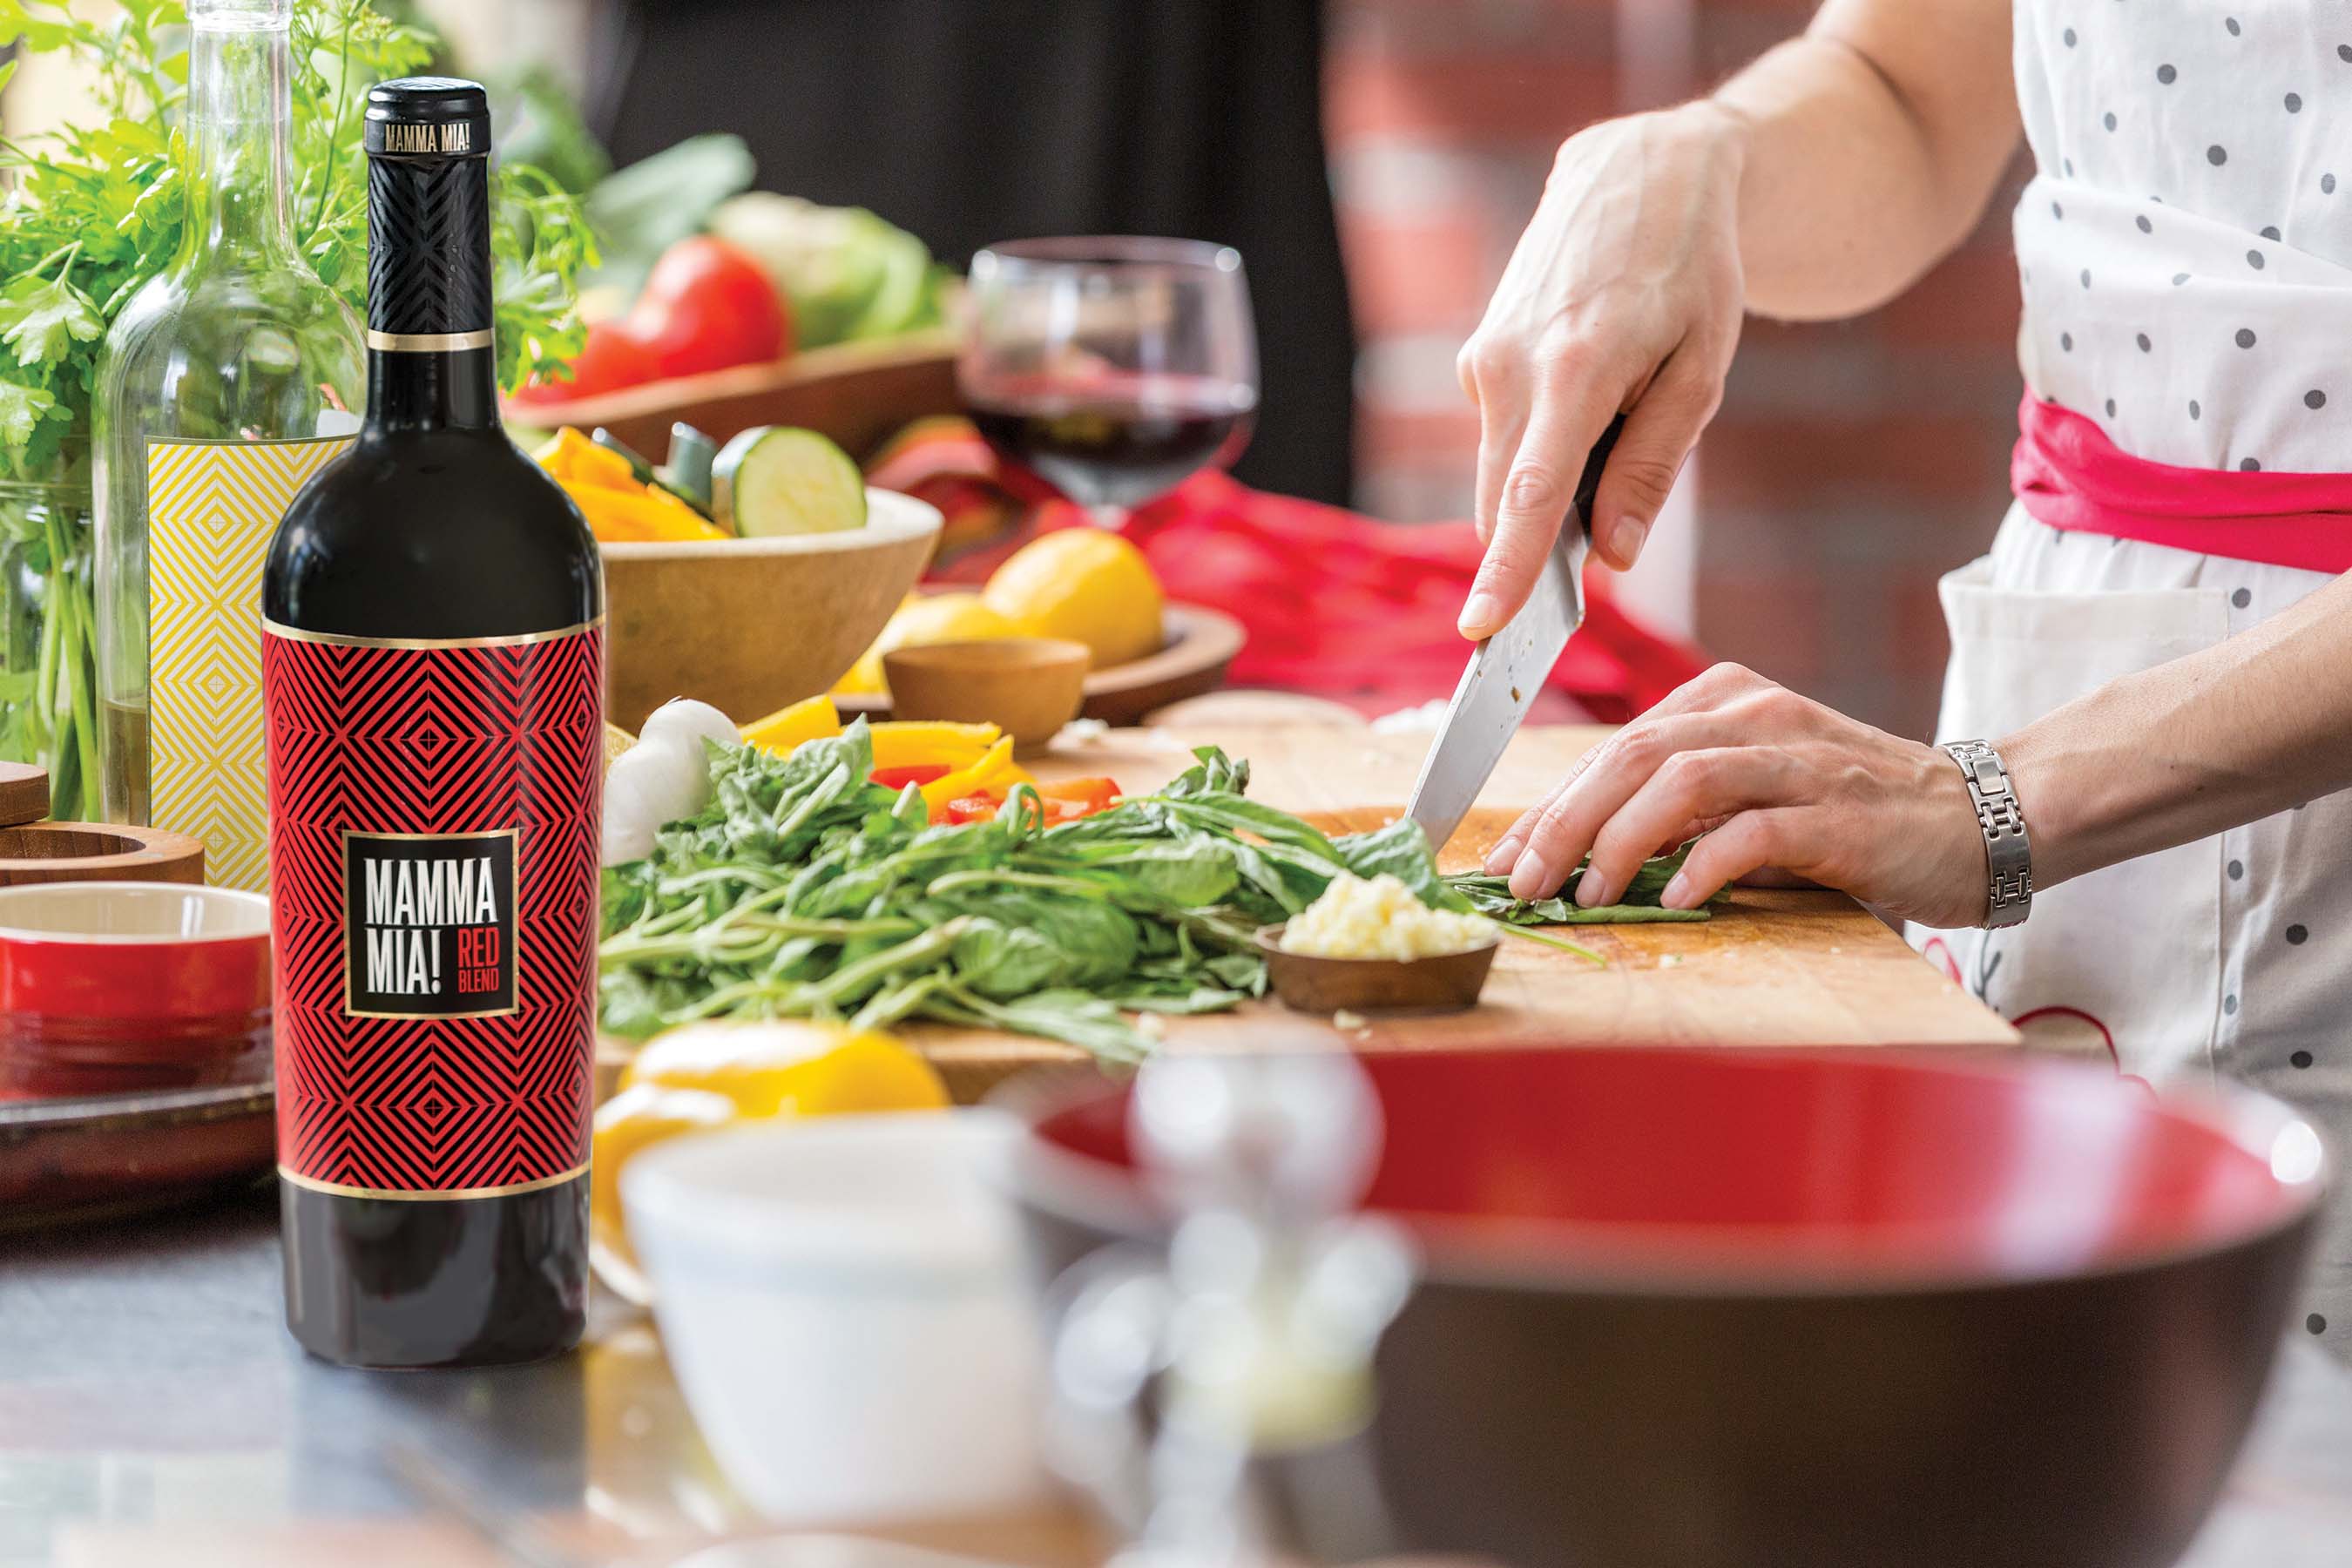 All of the fruit for Mamma Mia Wines is sourced from Italian vineyards. The wines are made and bottled in Puglia, Italy, located in the heel of Italy’s boot, by Winemaker Davide Sarcinella.